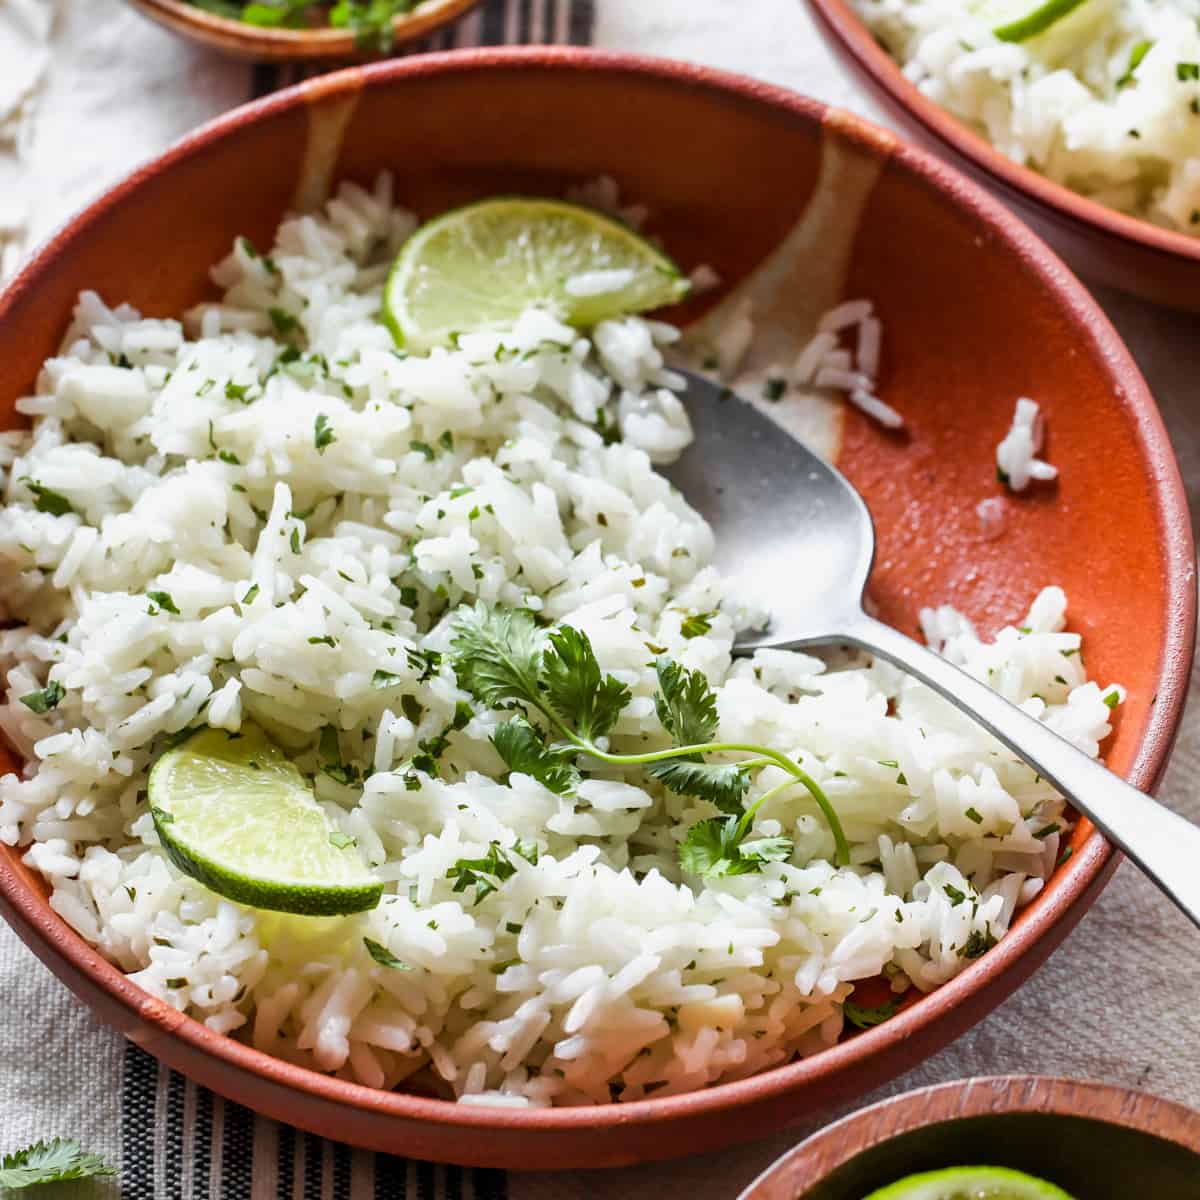 front view of a bowl of Cilantro Lime Rice garnished with cilantro and limes